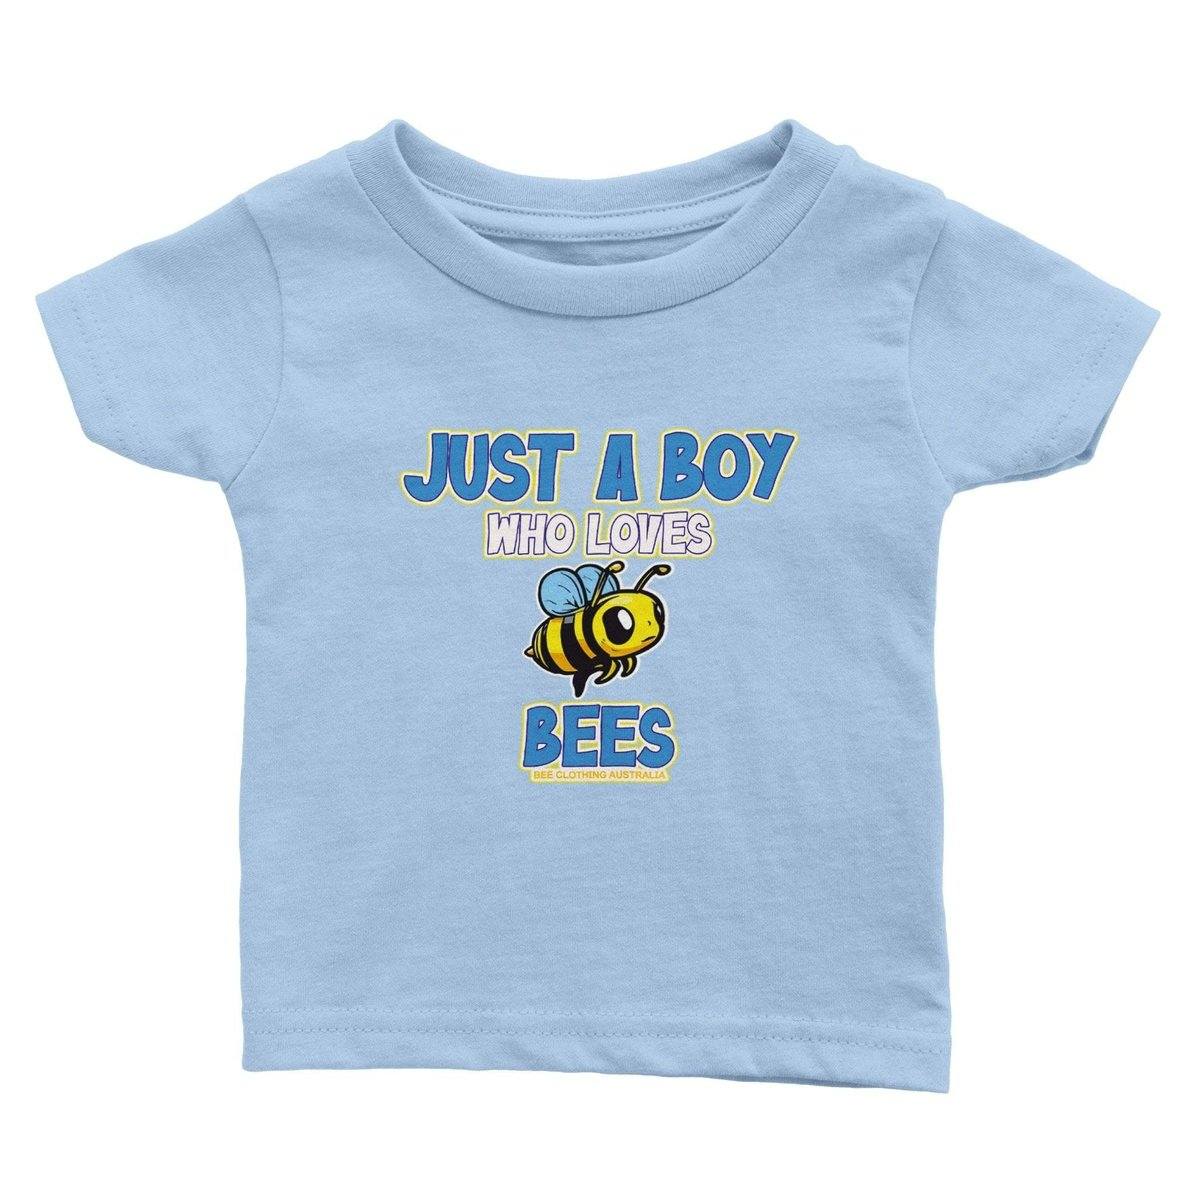 Just a Boy who loves bees T-Shirt - Baby Bee T-Shirts- Classic Baby Crewneck T-shirt Australia Online Color